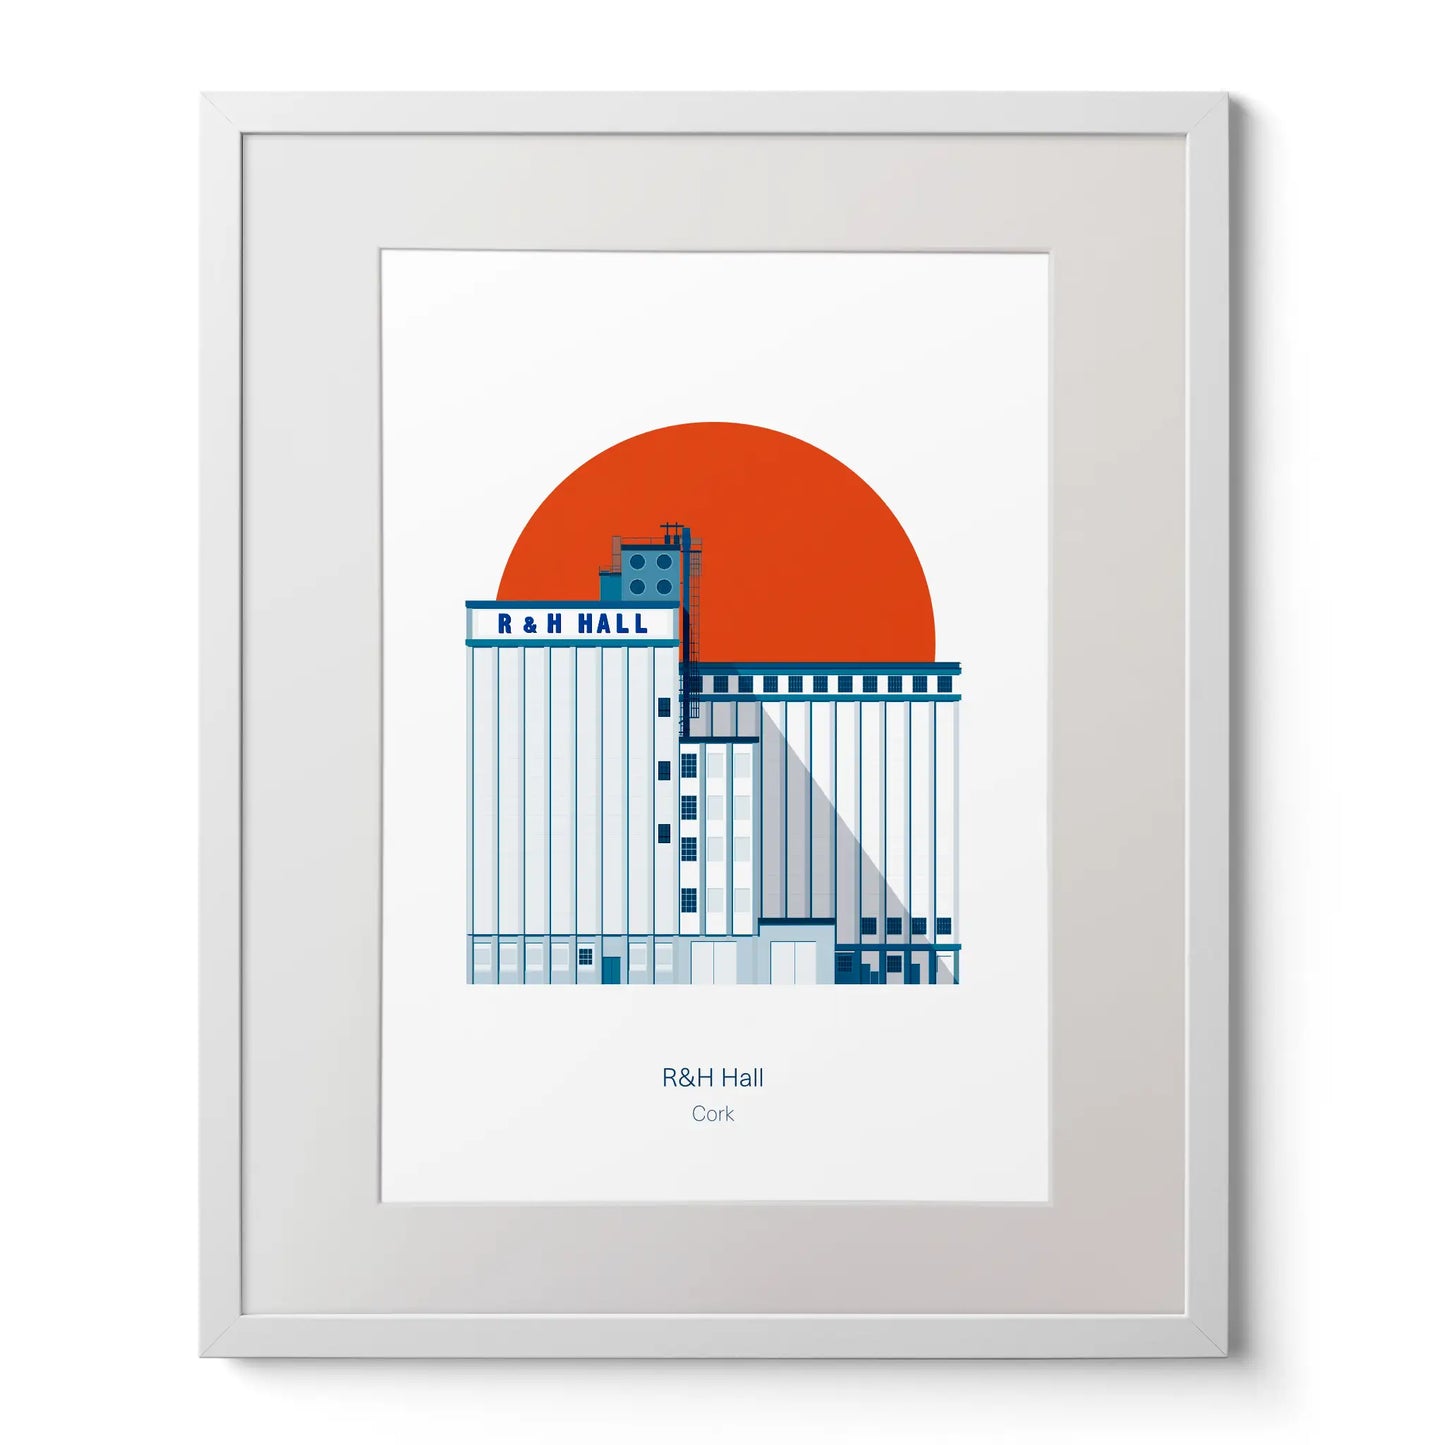 Framed illustrated art print of R&H Hall in Port of Cork, with red background.